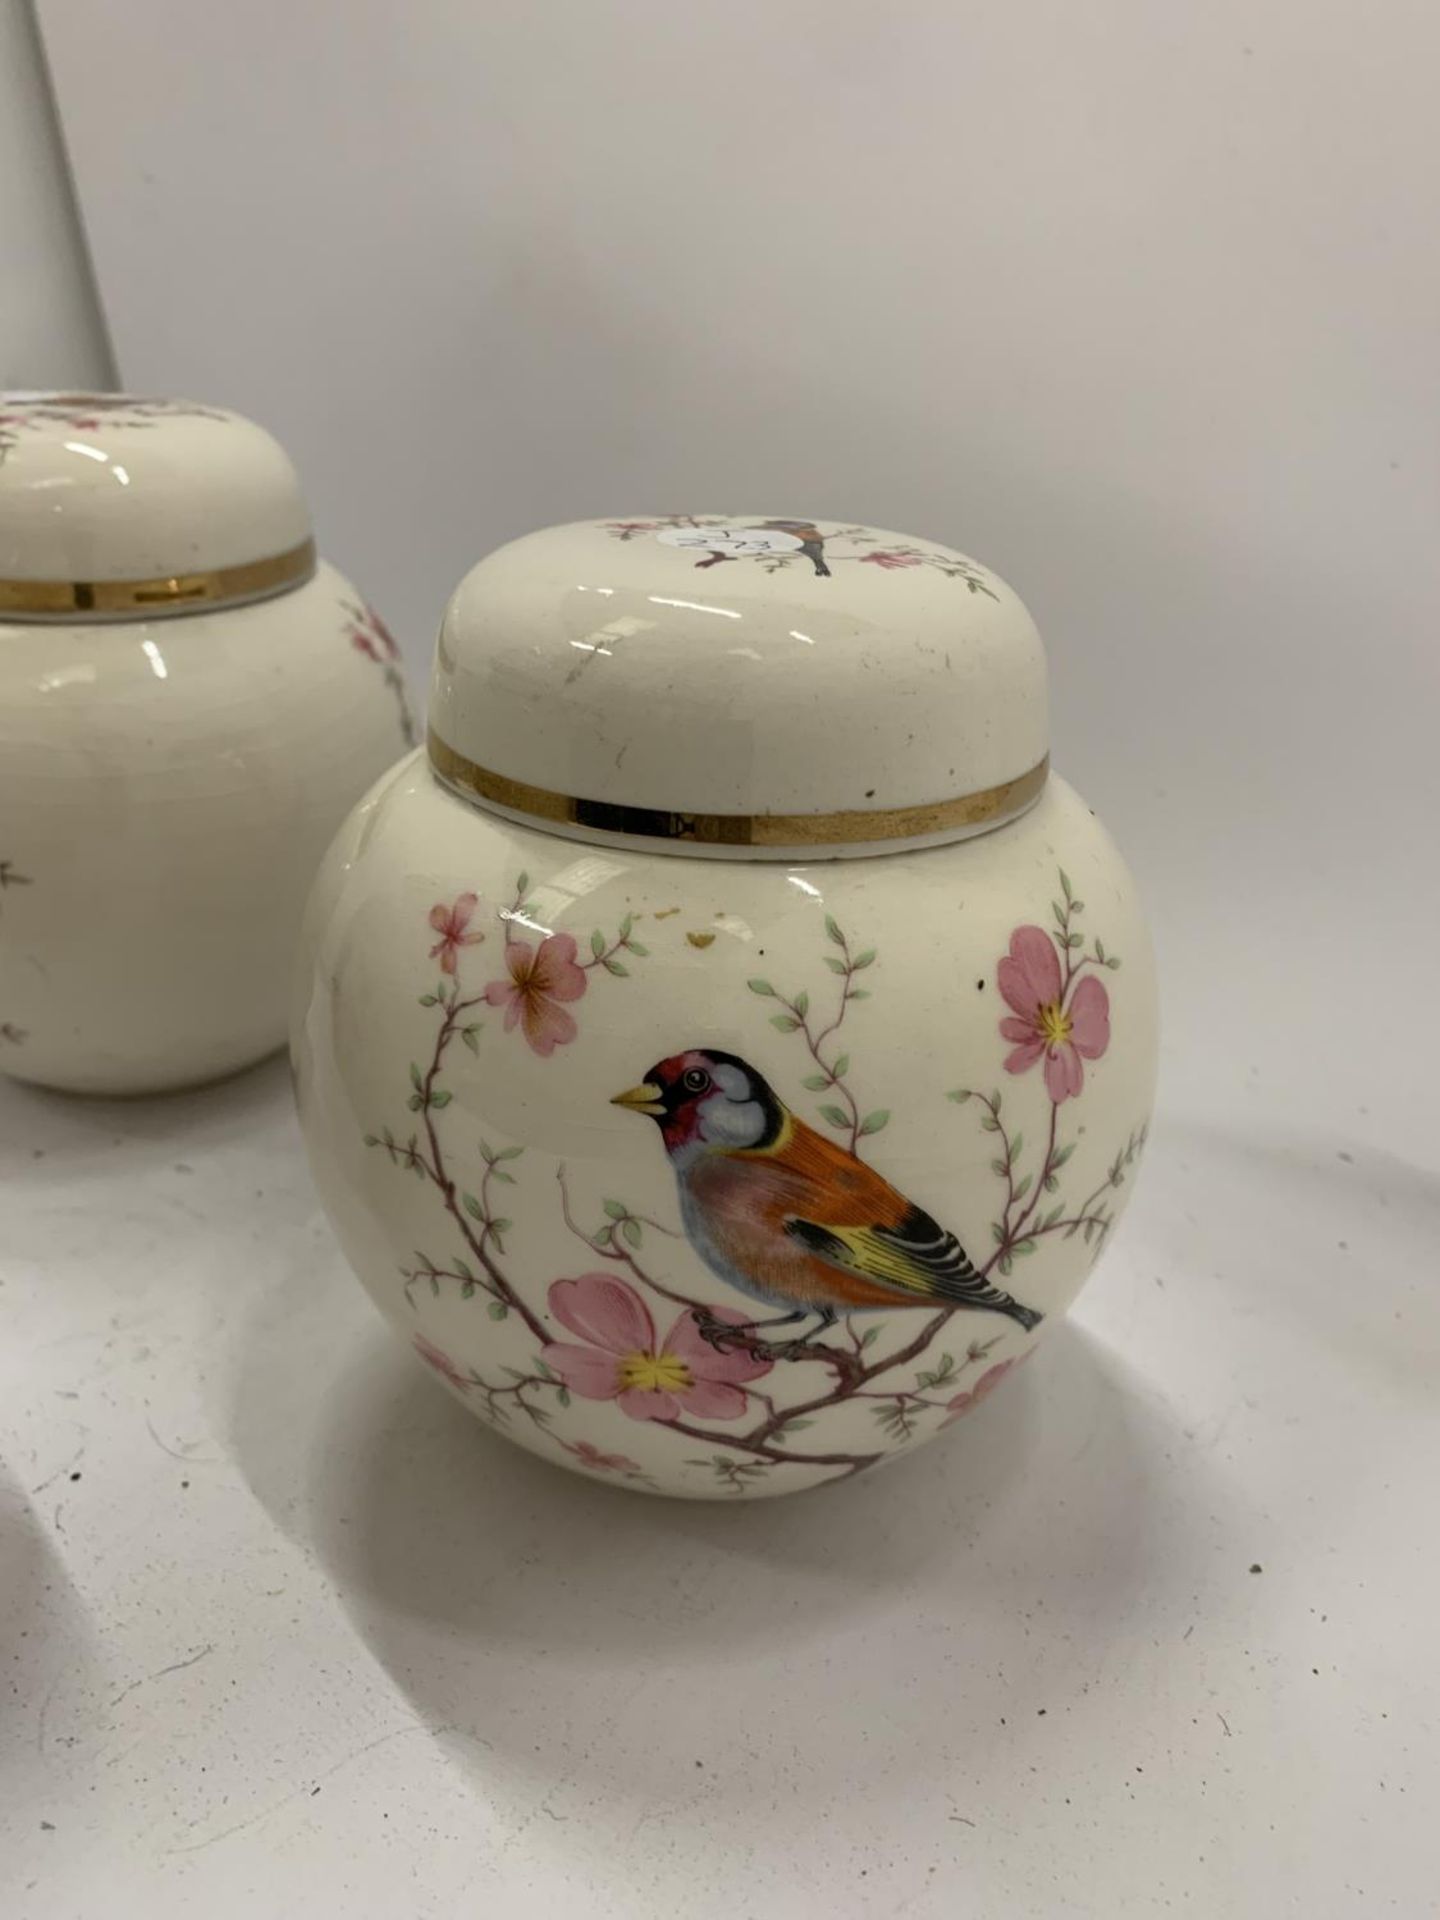 TWO ARTHUR WOOD GINGER JARS AND A TEMPLE JAR WITH BIRDS AND BLOSSOM DESIGN - Image 4 of 8